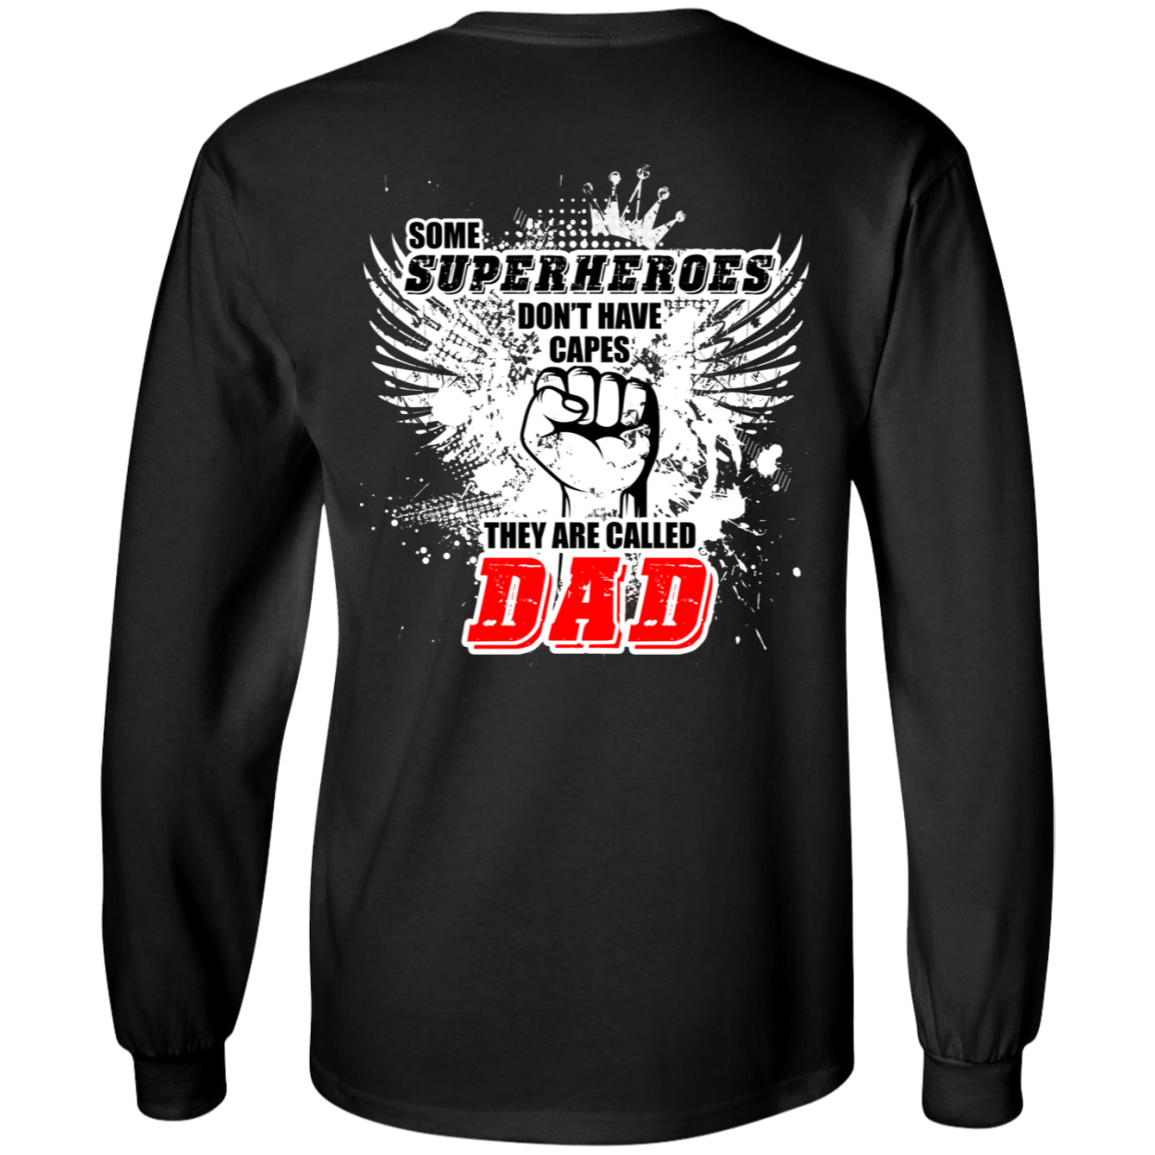 Some Superheroes Don't Have Capes, They Are Called Dad Long Sleeve T-Shirt, Cotton, Black